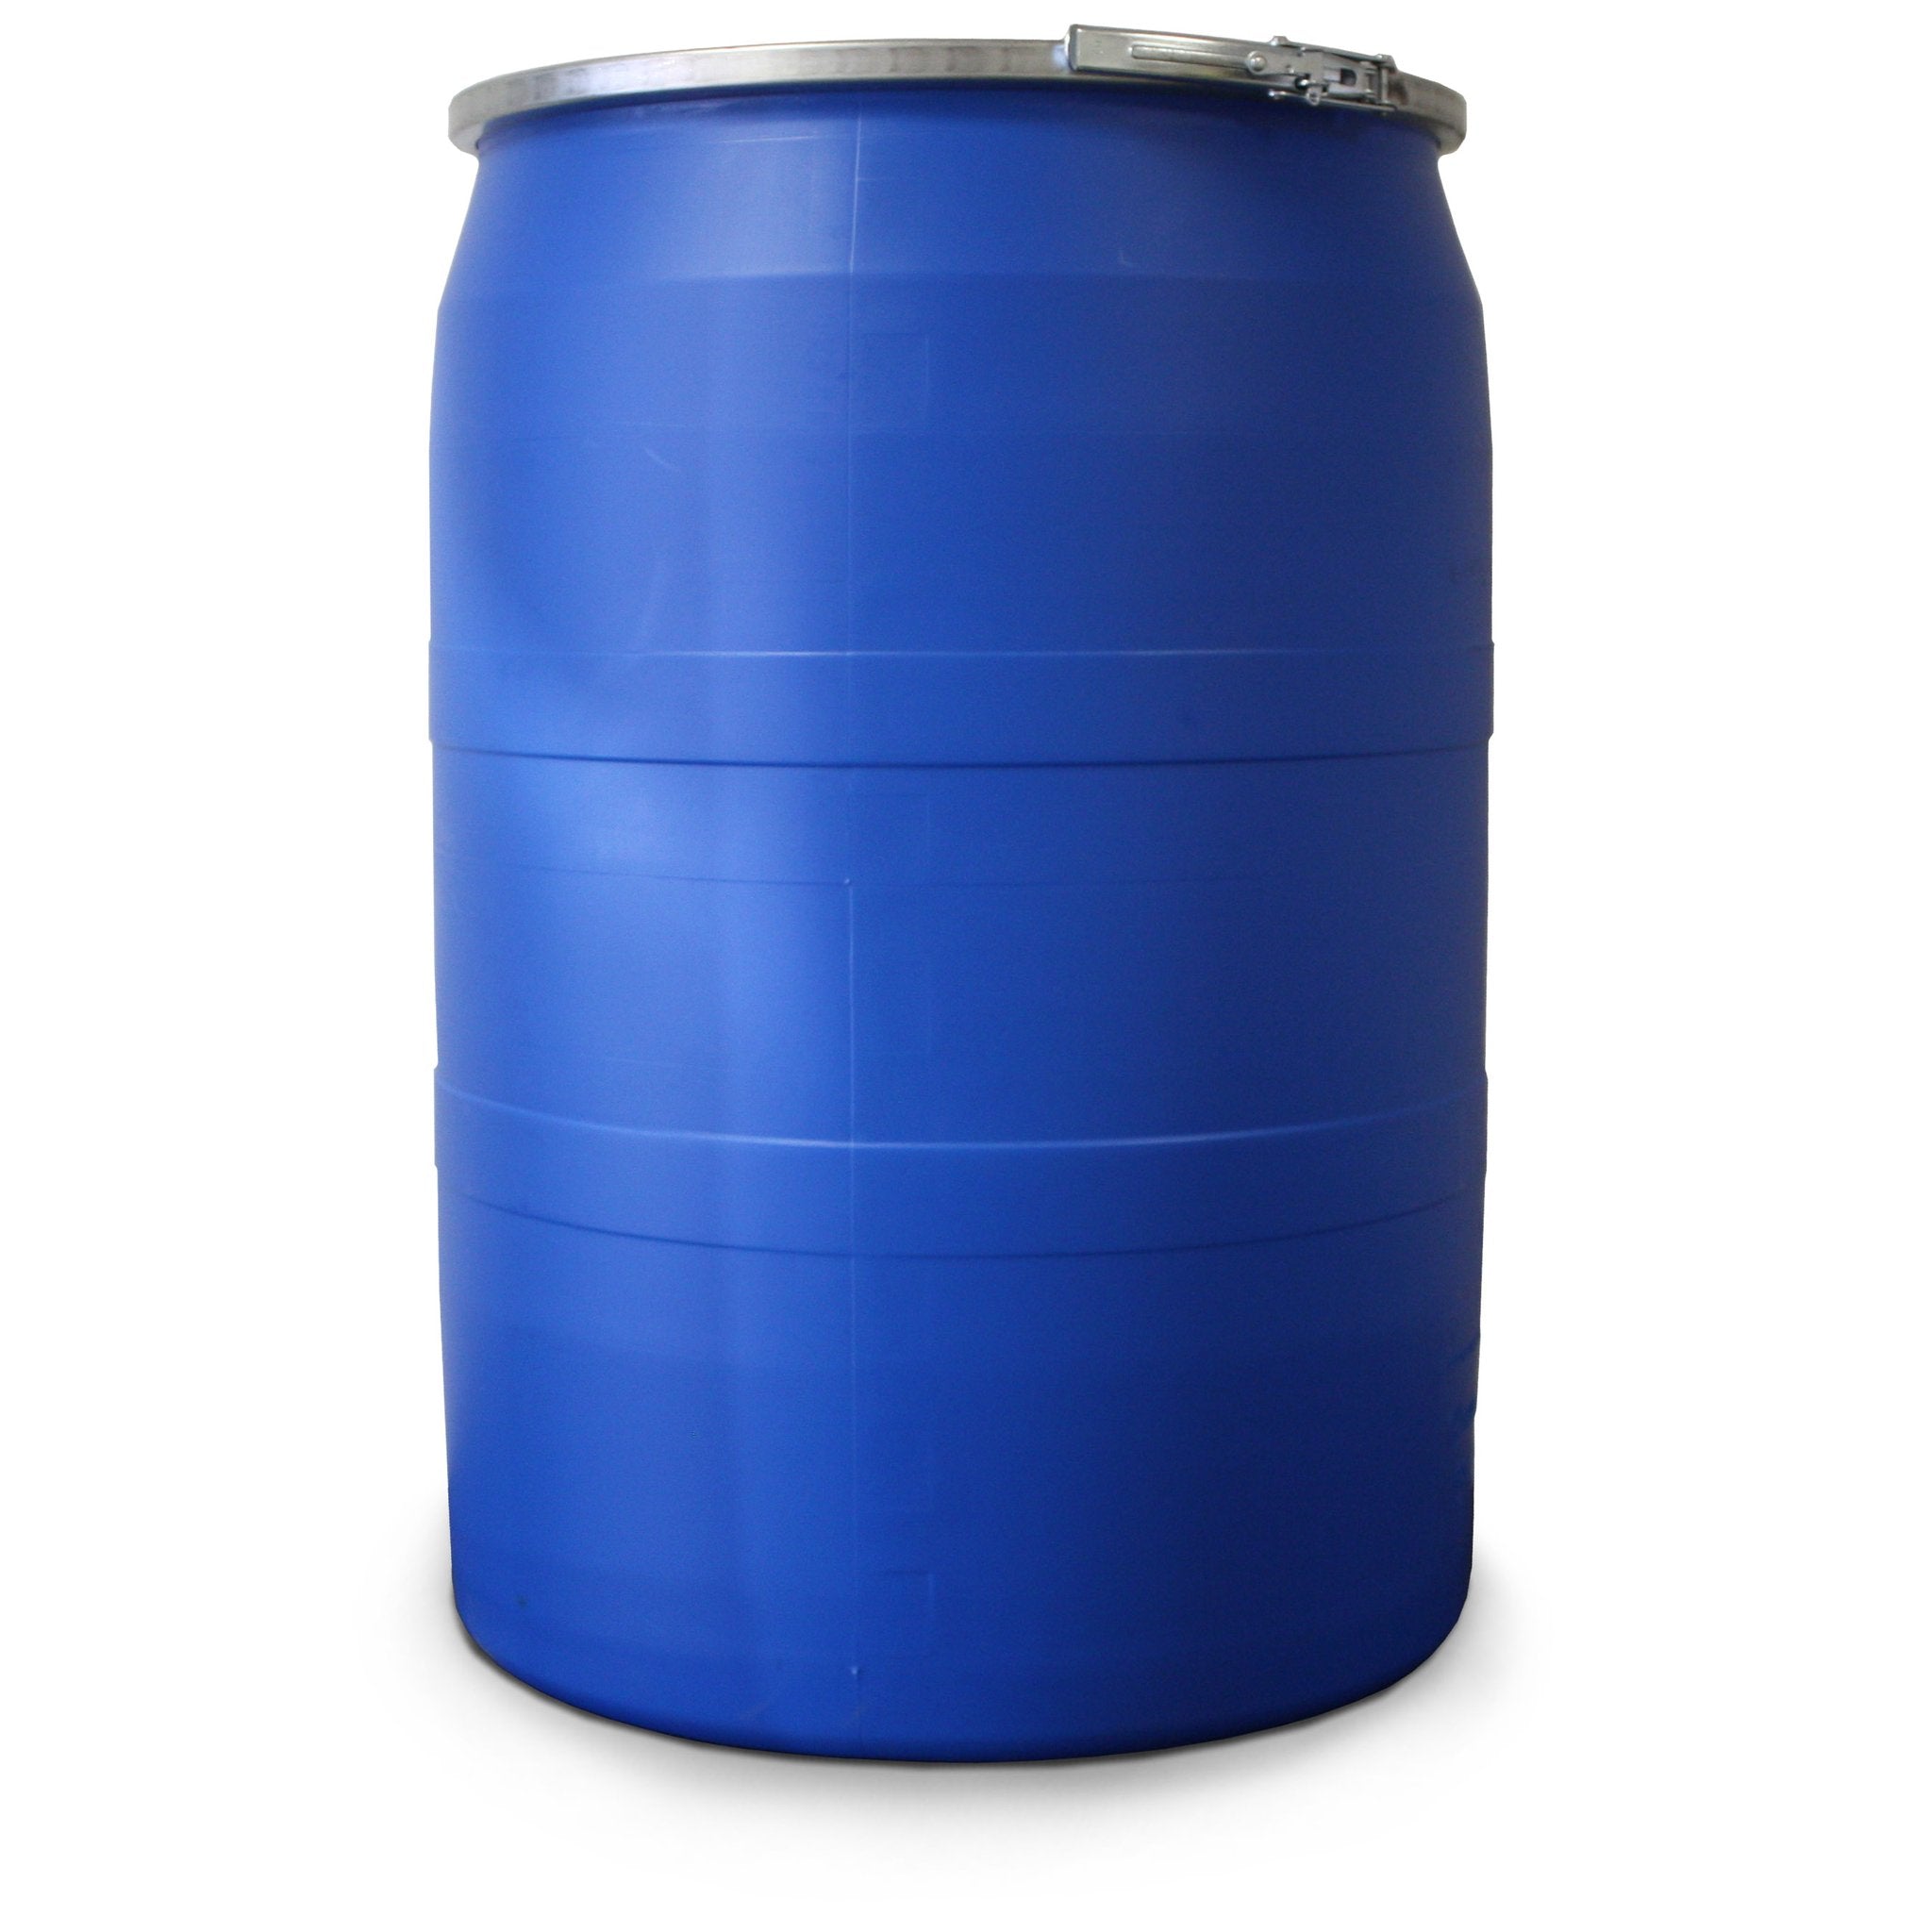 XSORB Universal Spill Clean-Up 55 gal Drum - 1 EACH